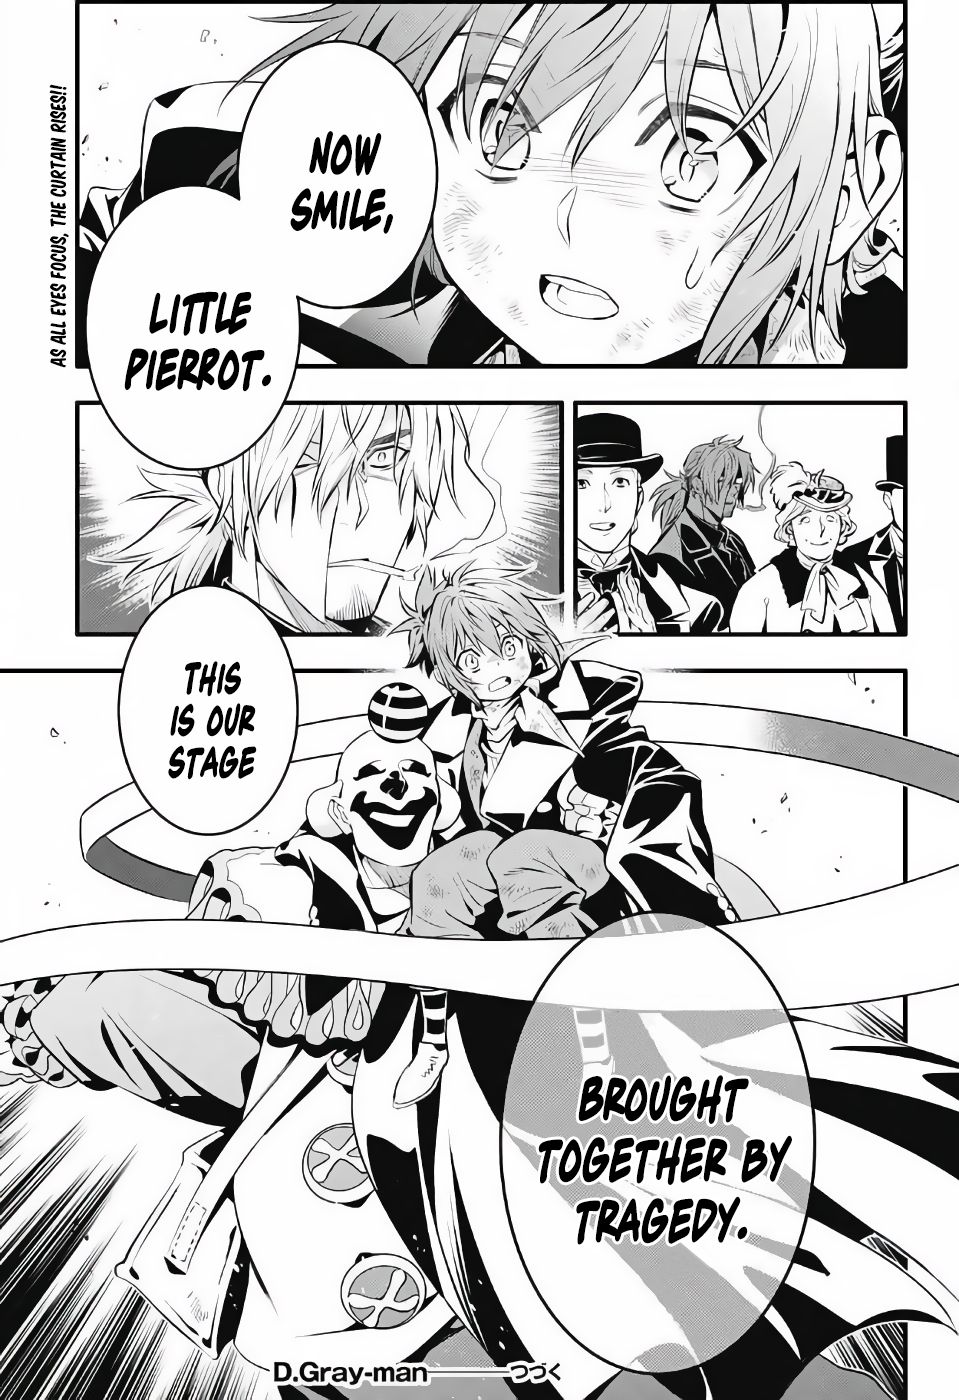 D.Gray-man chapter 236 page 26